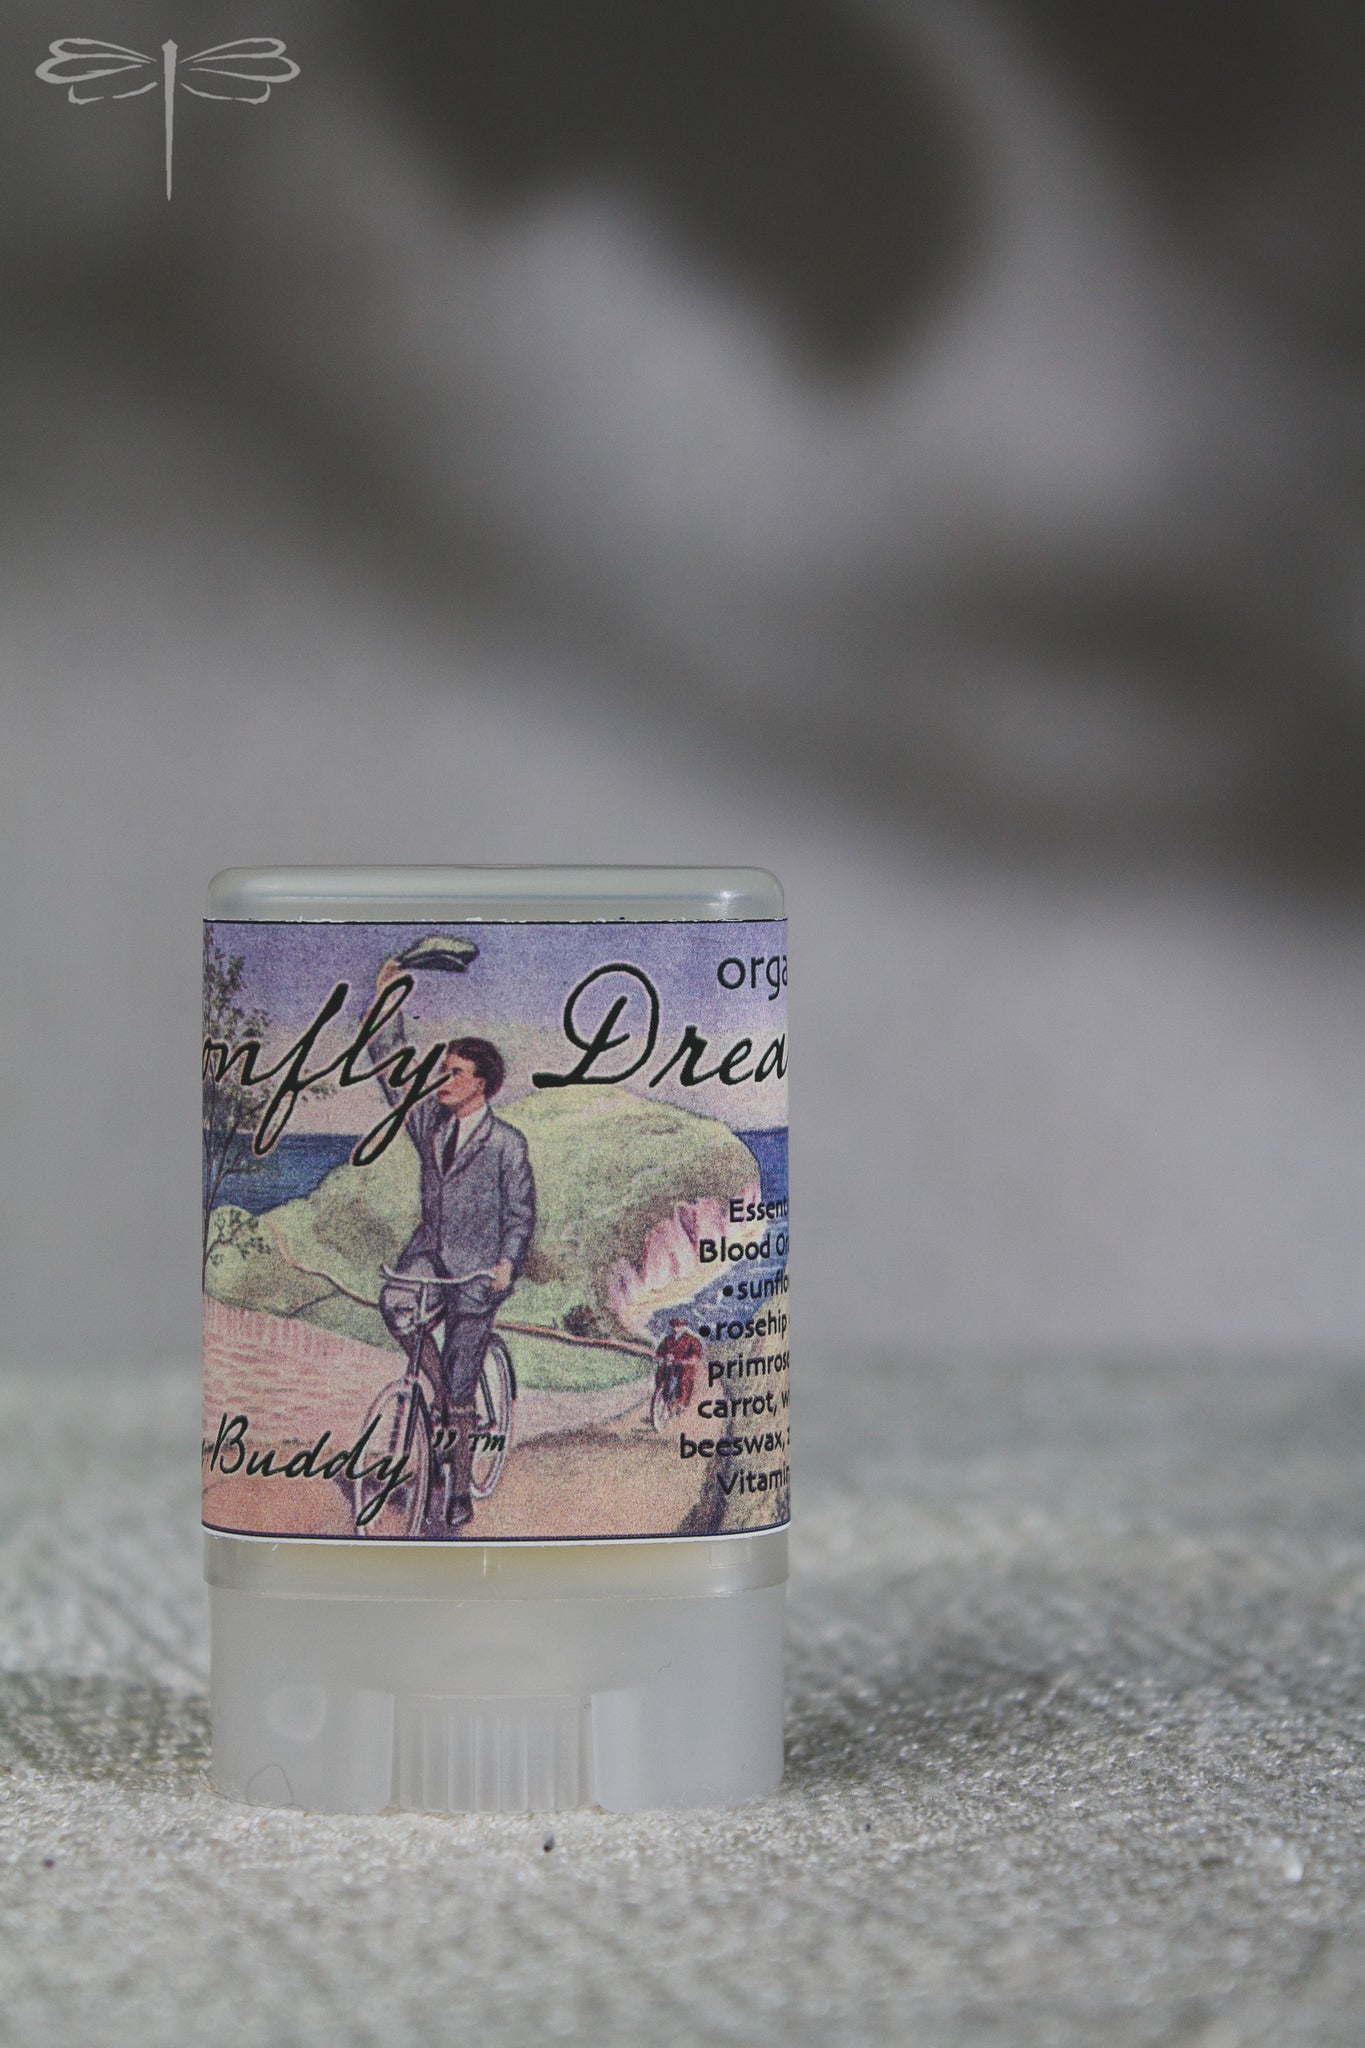 Pictured here, Biking Buddt. Organic Lip Balm by Dragonfly Dreaming Organics